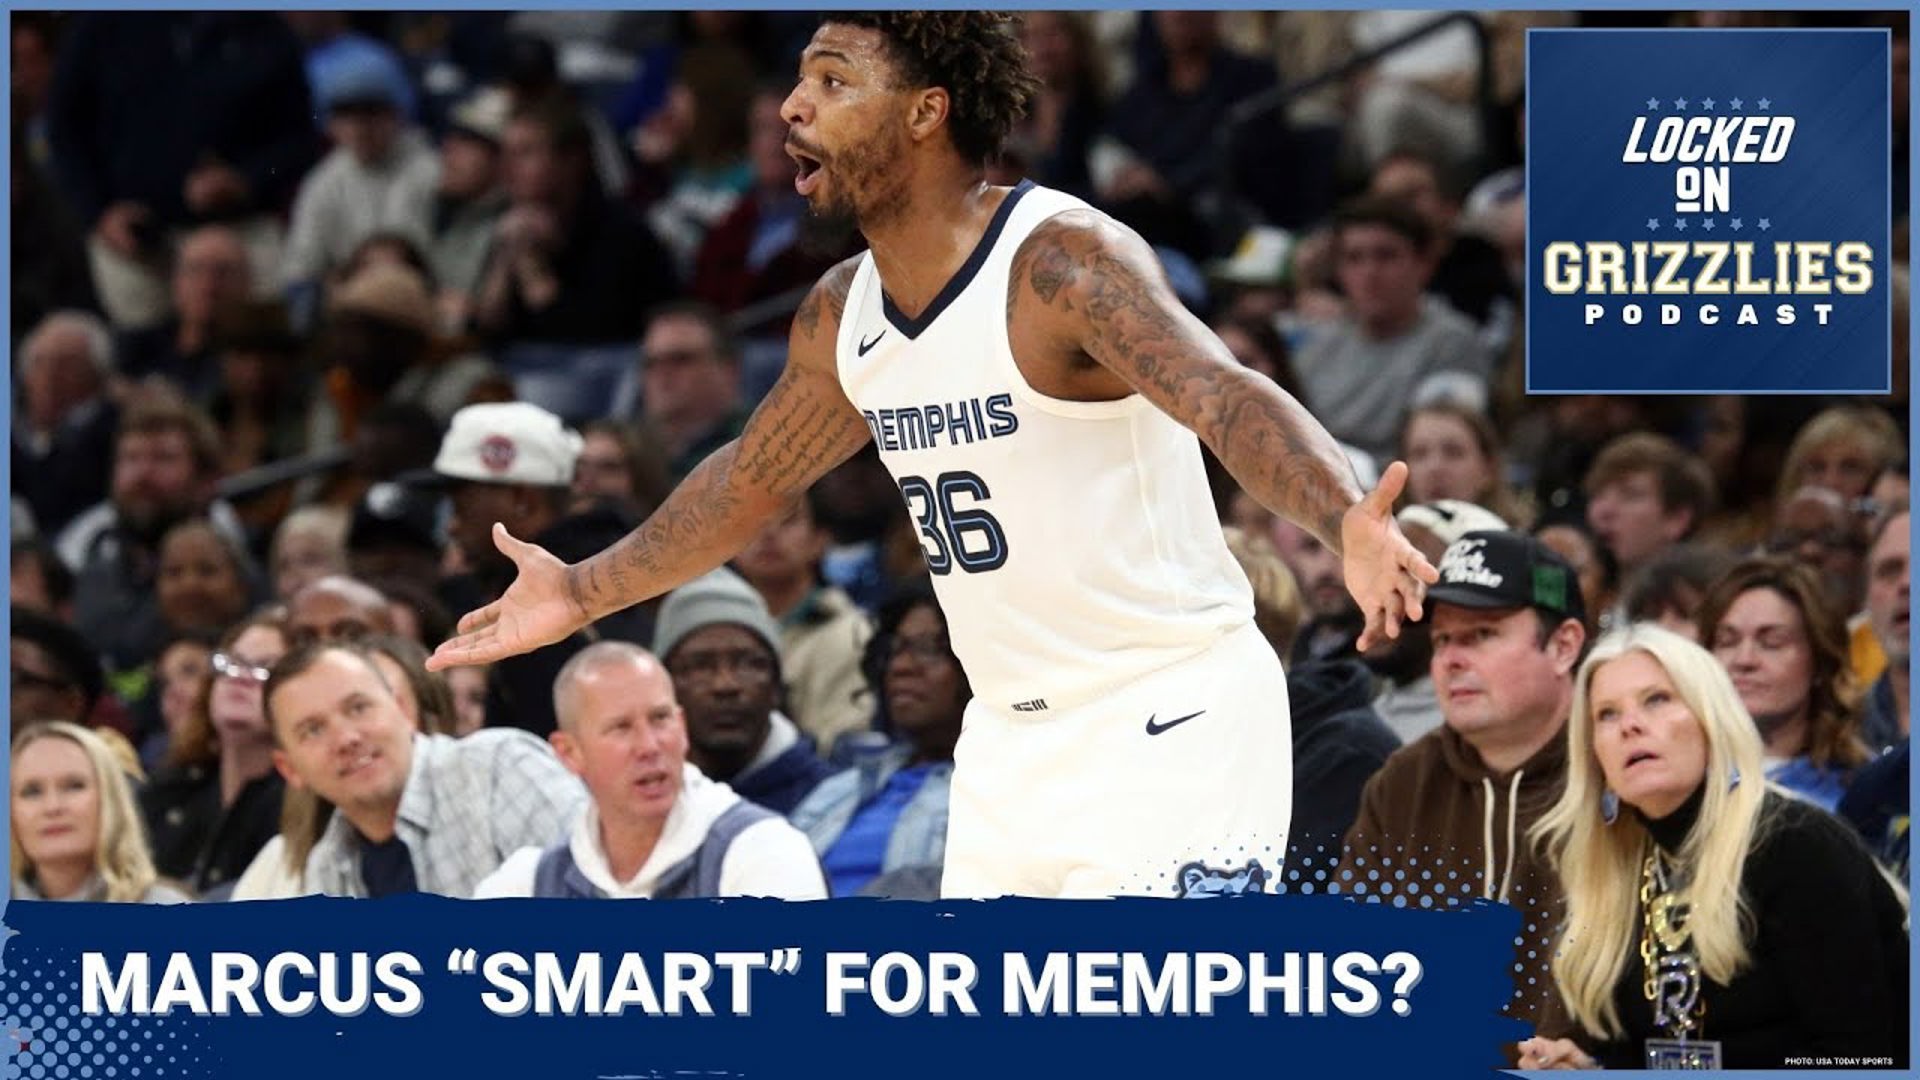 Should the Memphis Grizzlies keep both Marcus Smart and Luke Kennard?